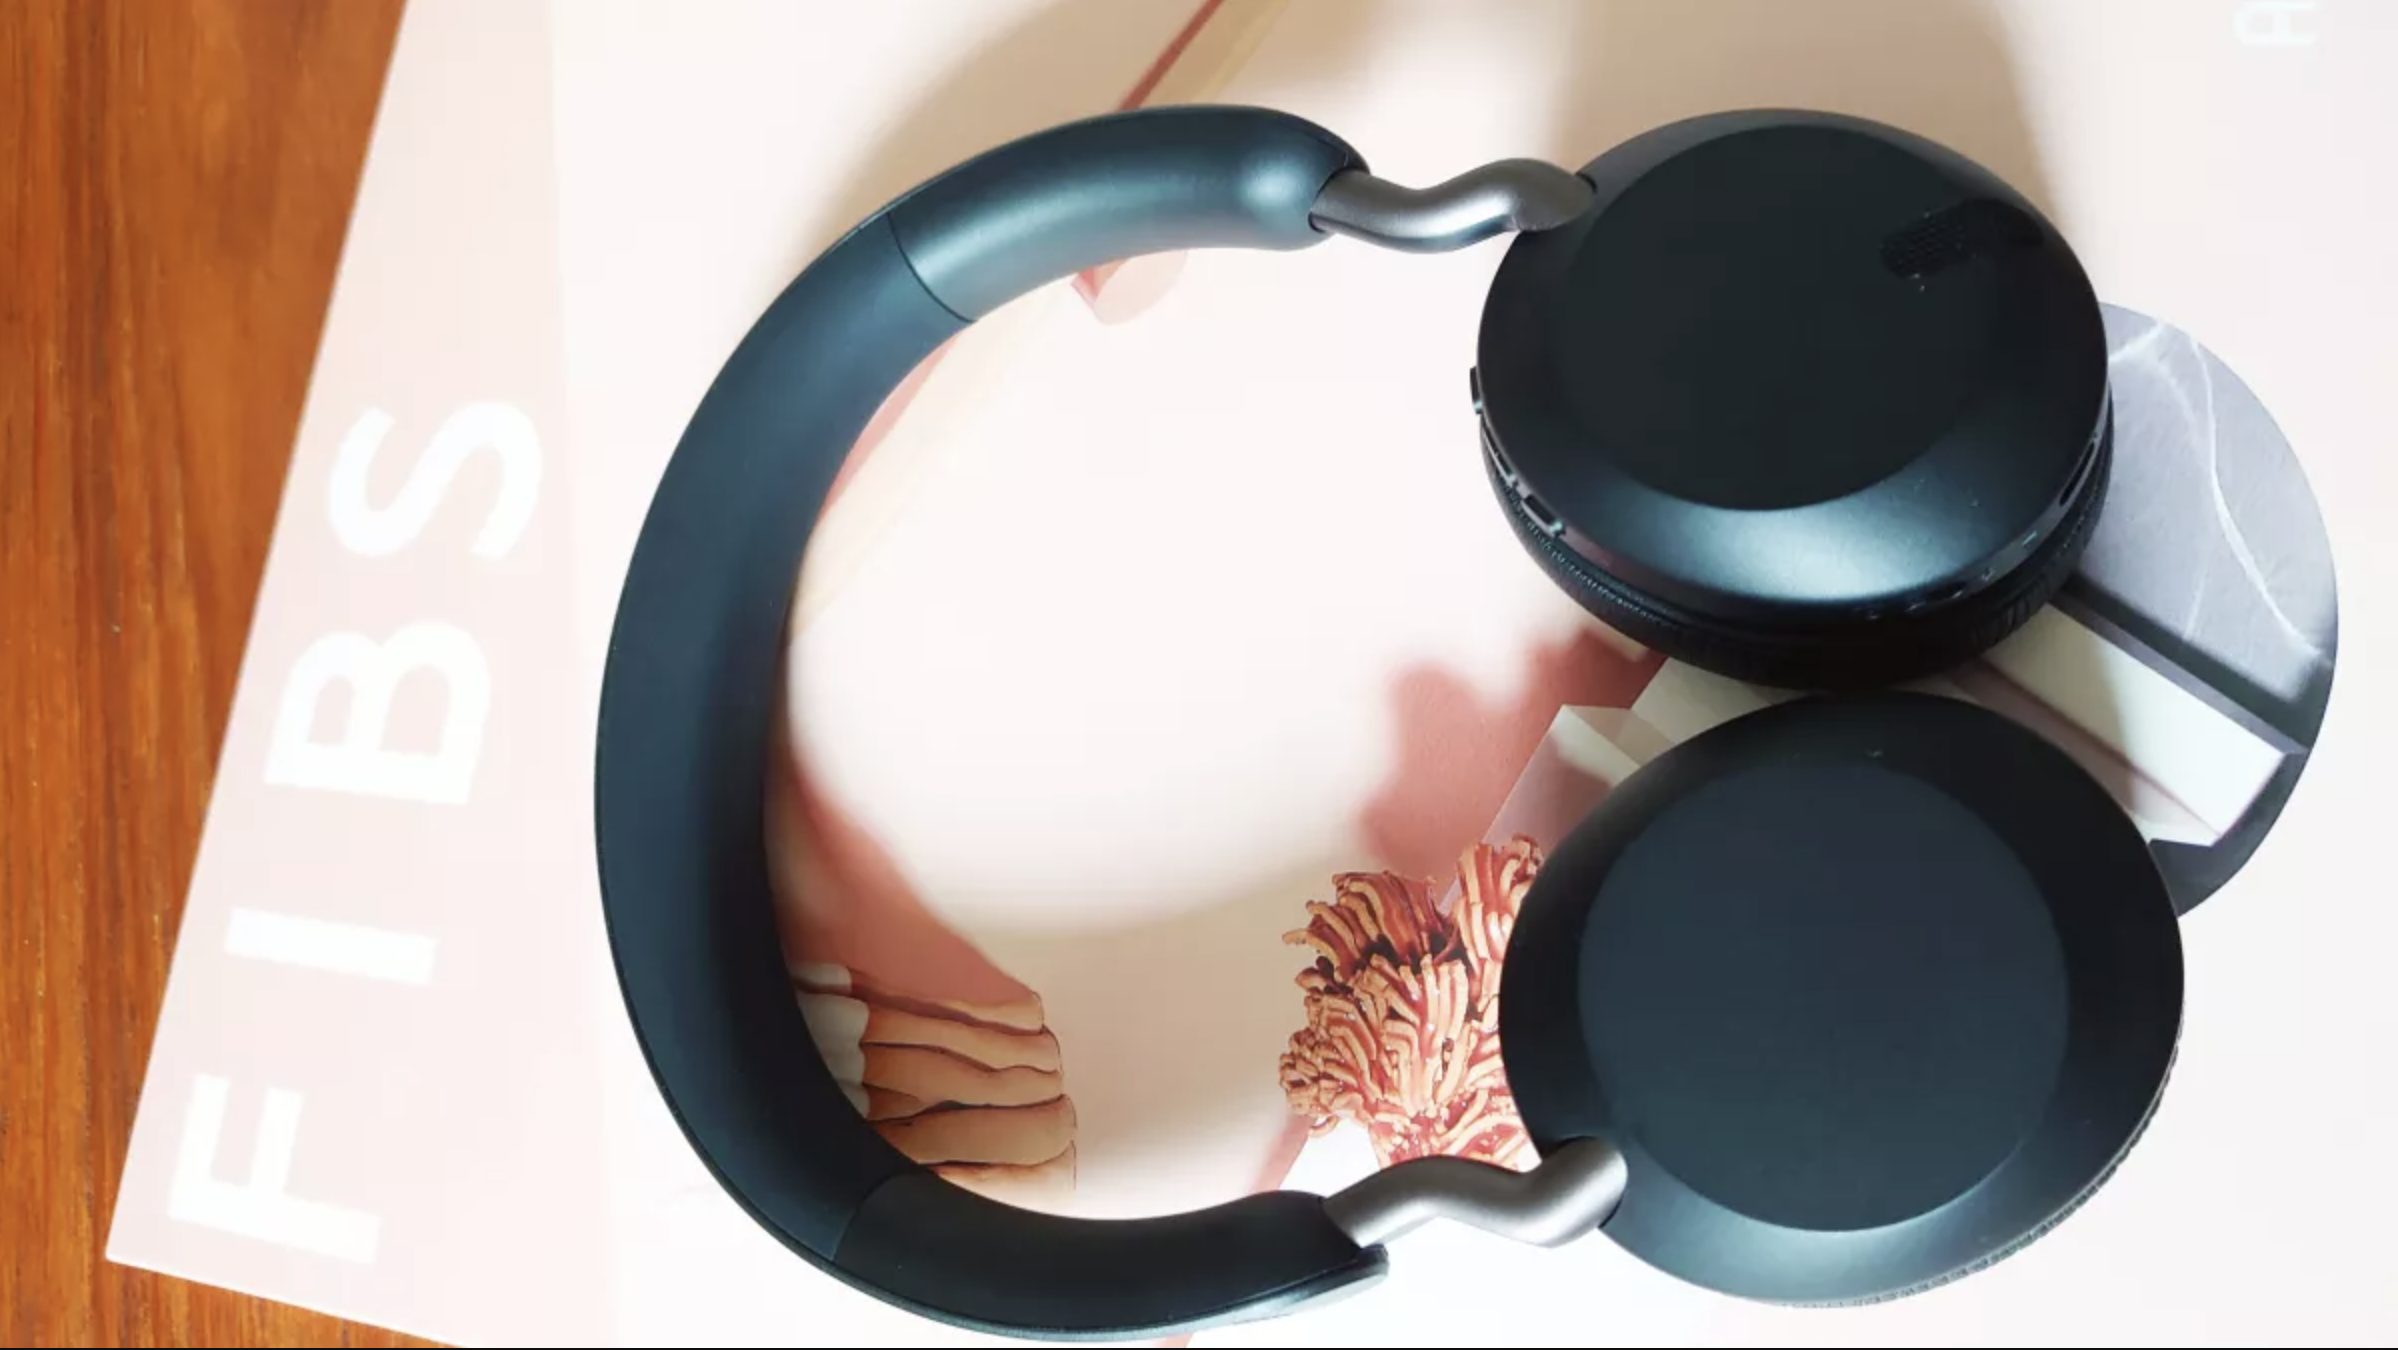 The Jabra Elite 45h wireless headphones in black on a wooden surface